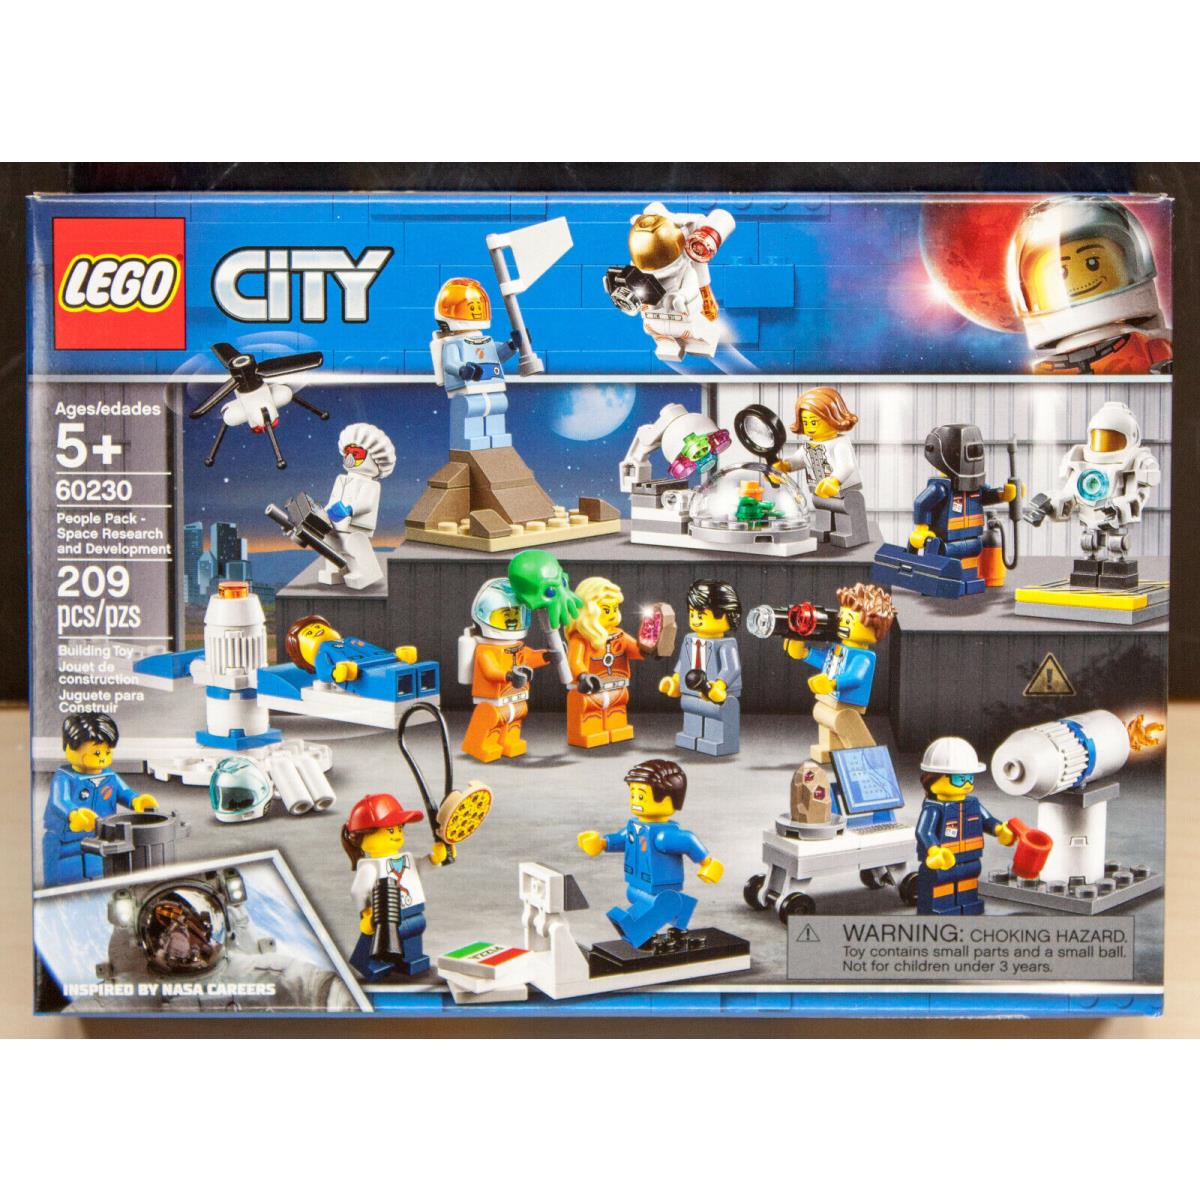 Lego City People Pack - Space Research and Development 60230 Box